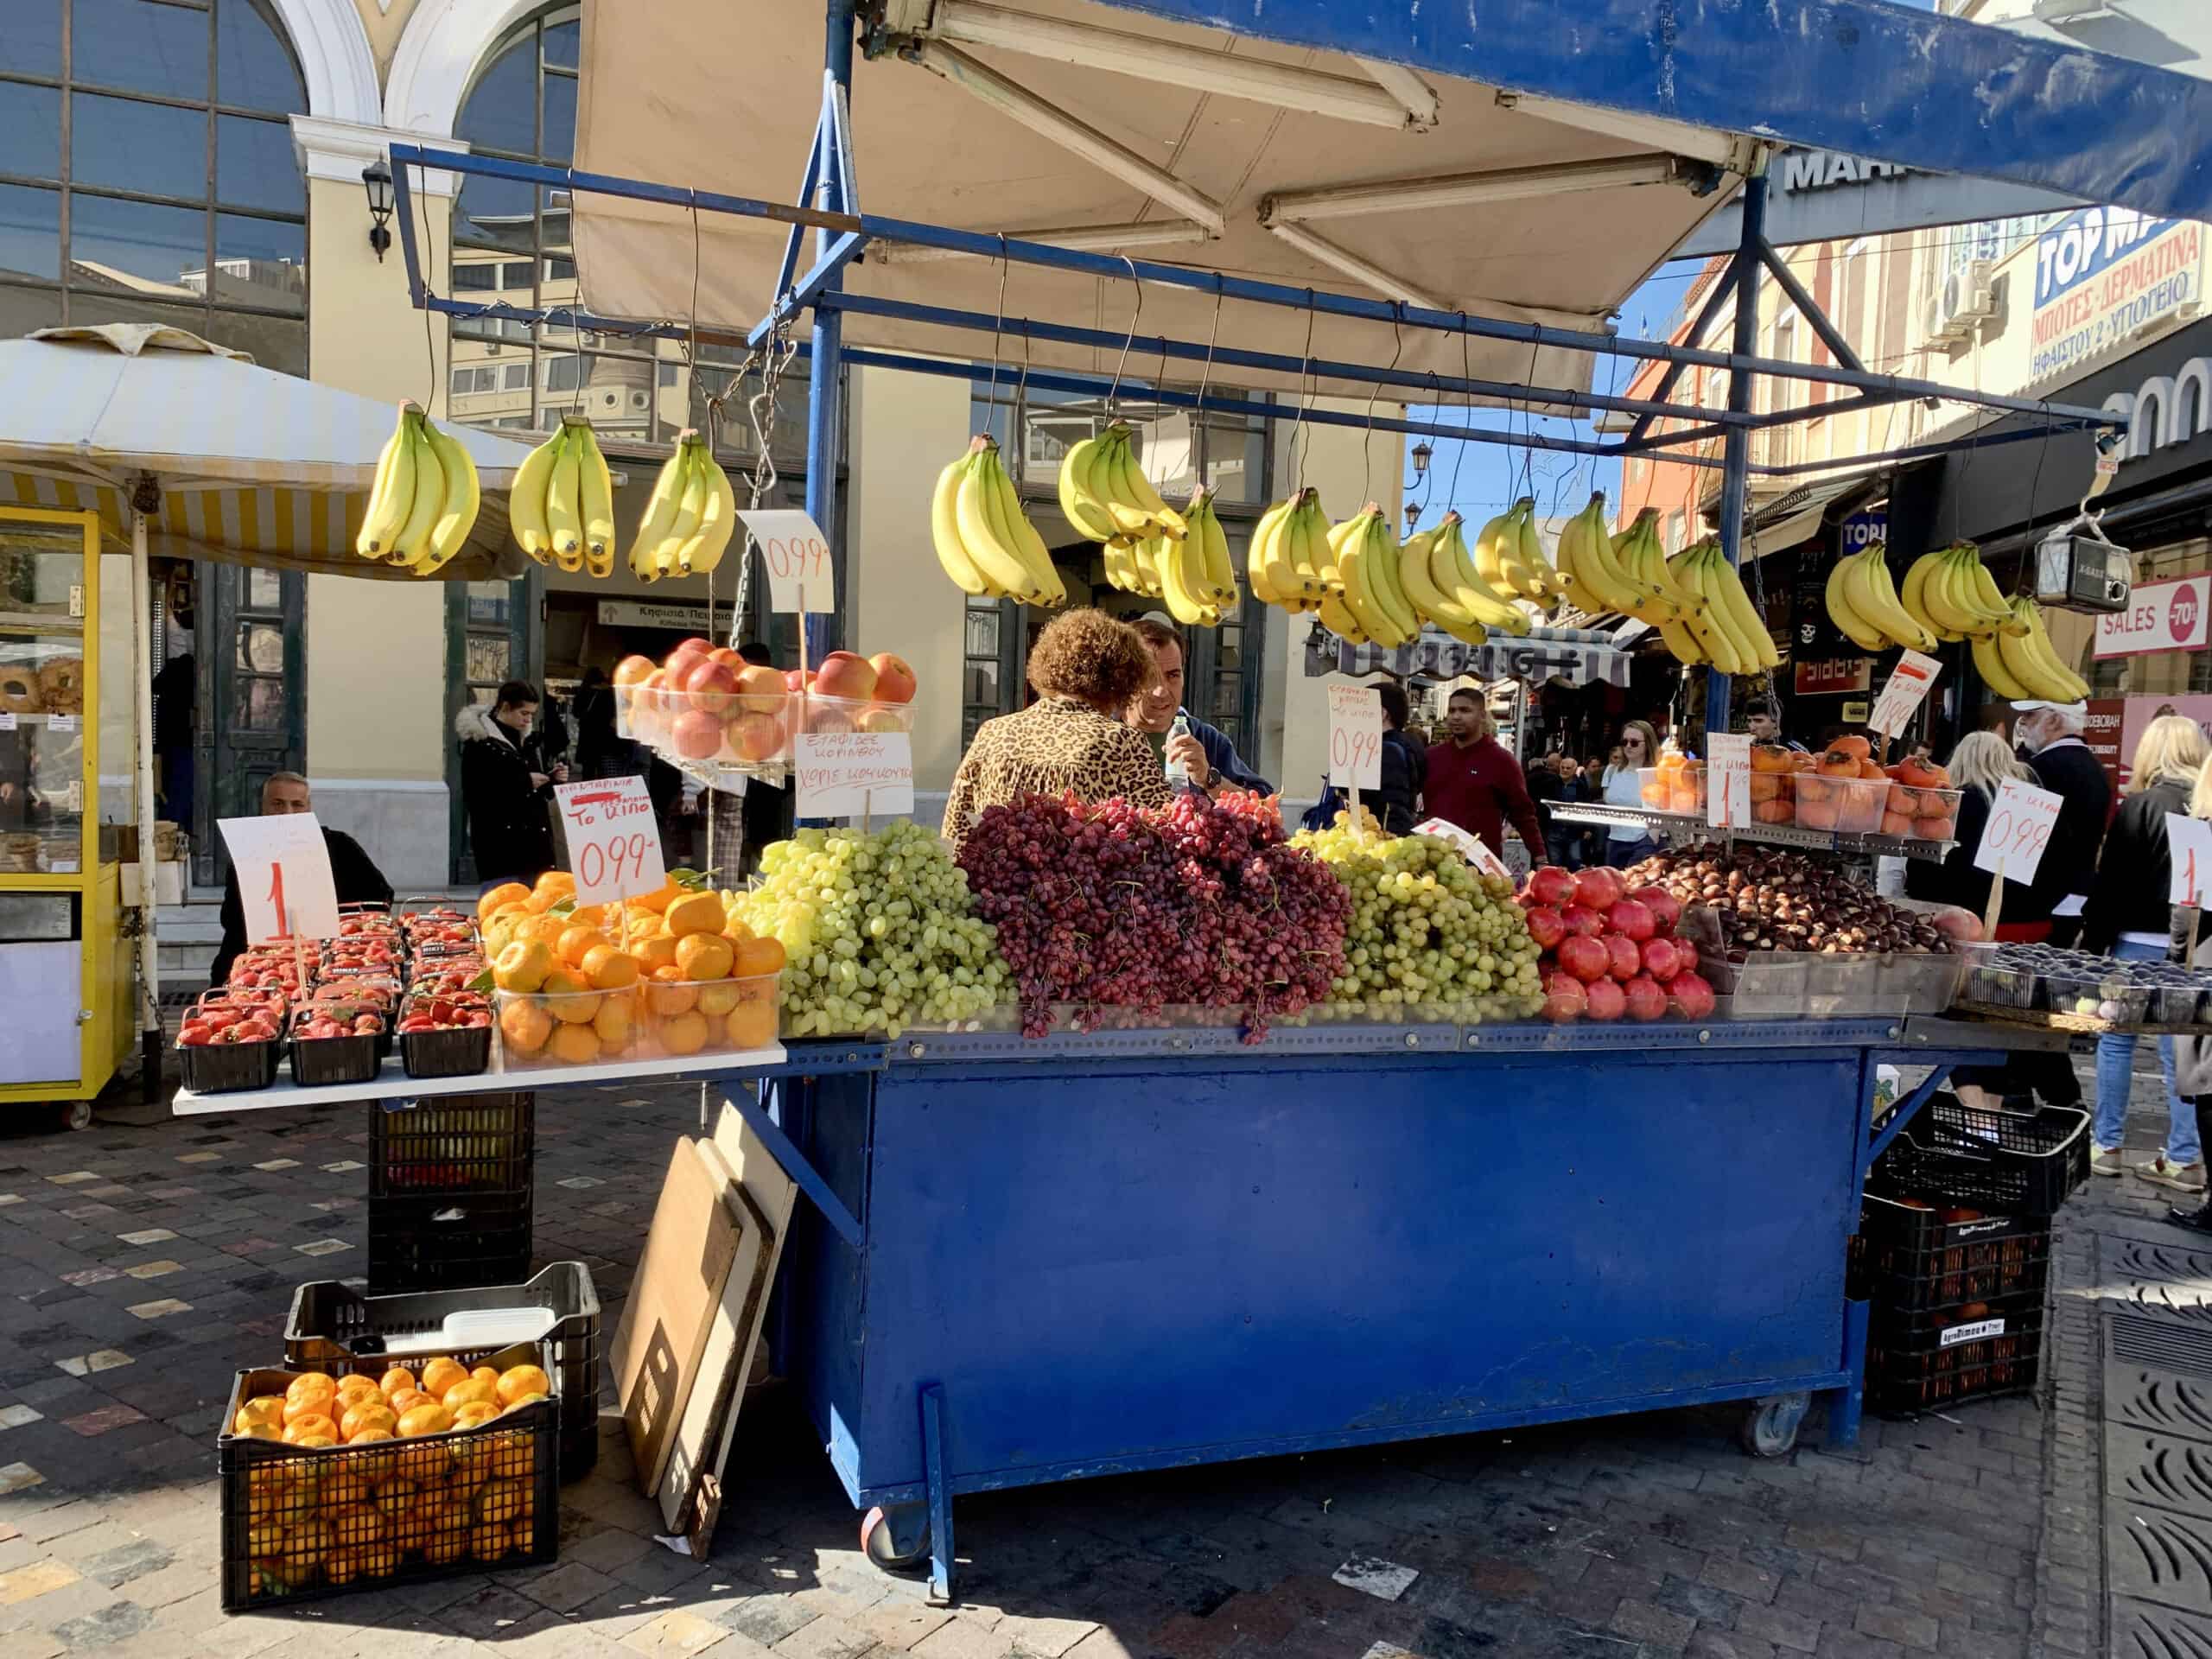 Find a fruit stand in Greece to try produce. This one is from Athens, Greece